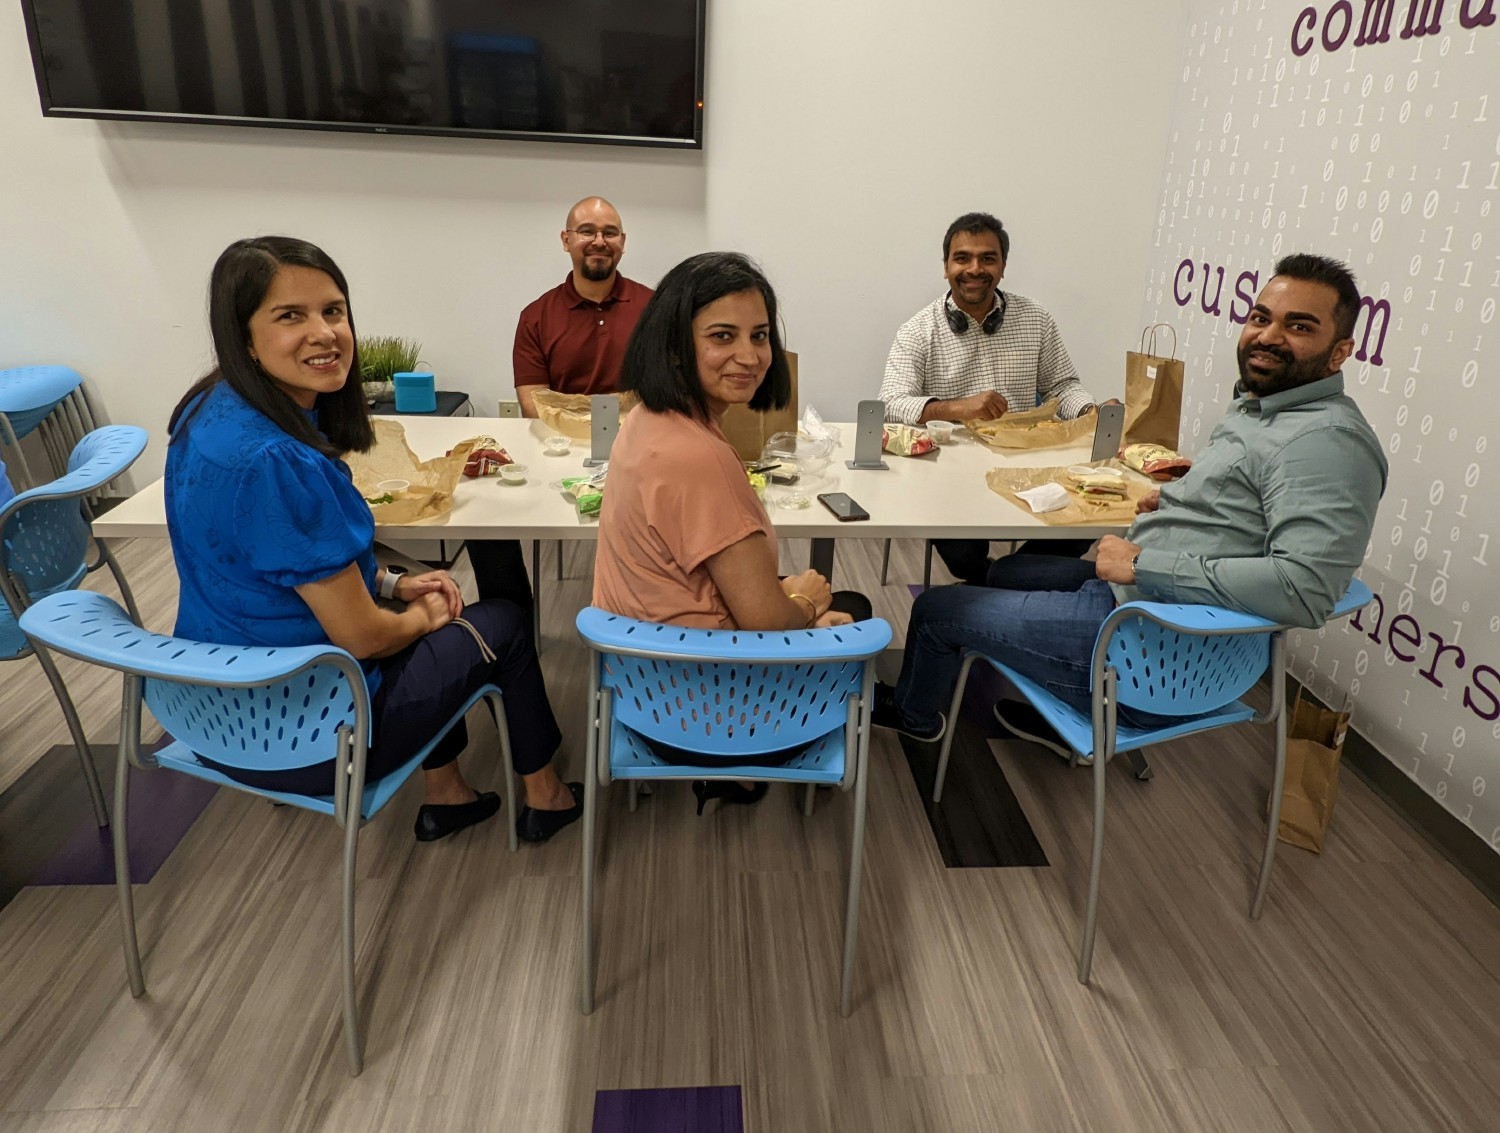 Employees taking a lunch break from a workshop focused on improving customer service.